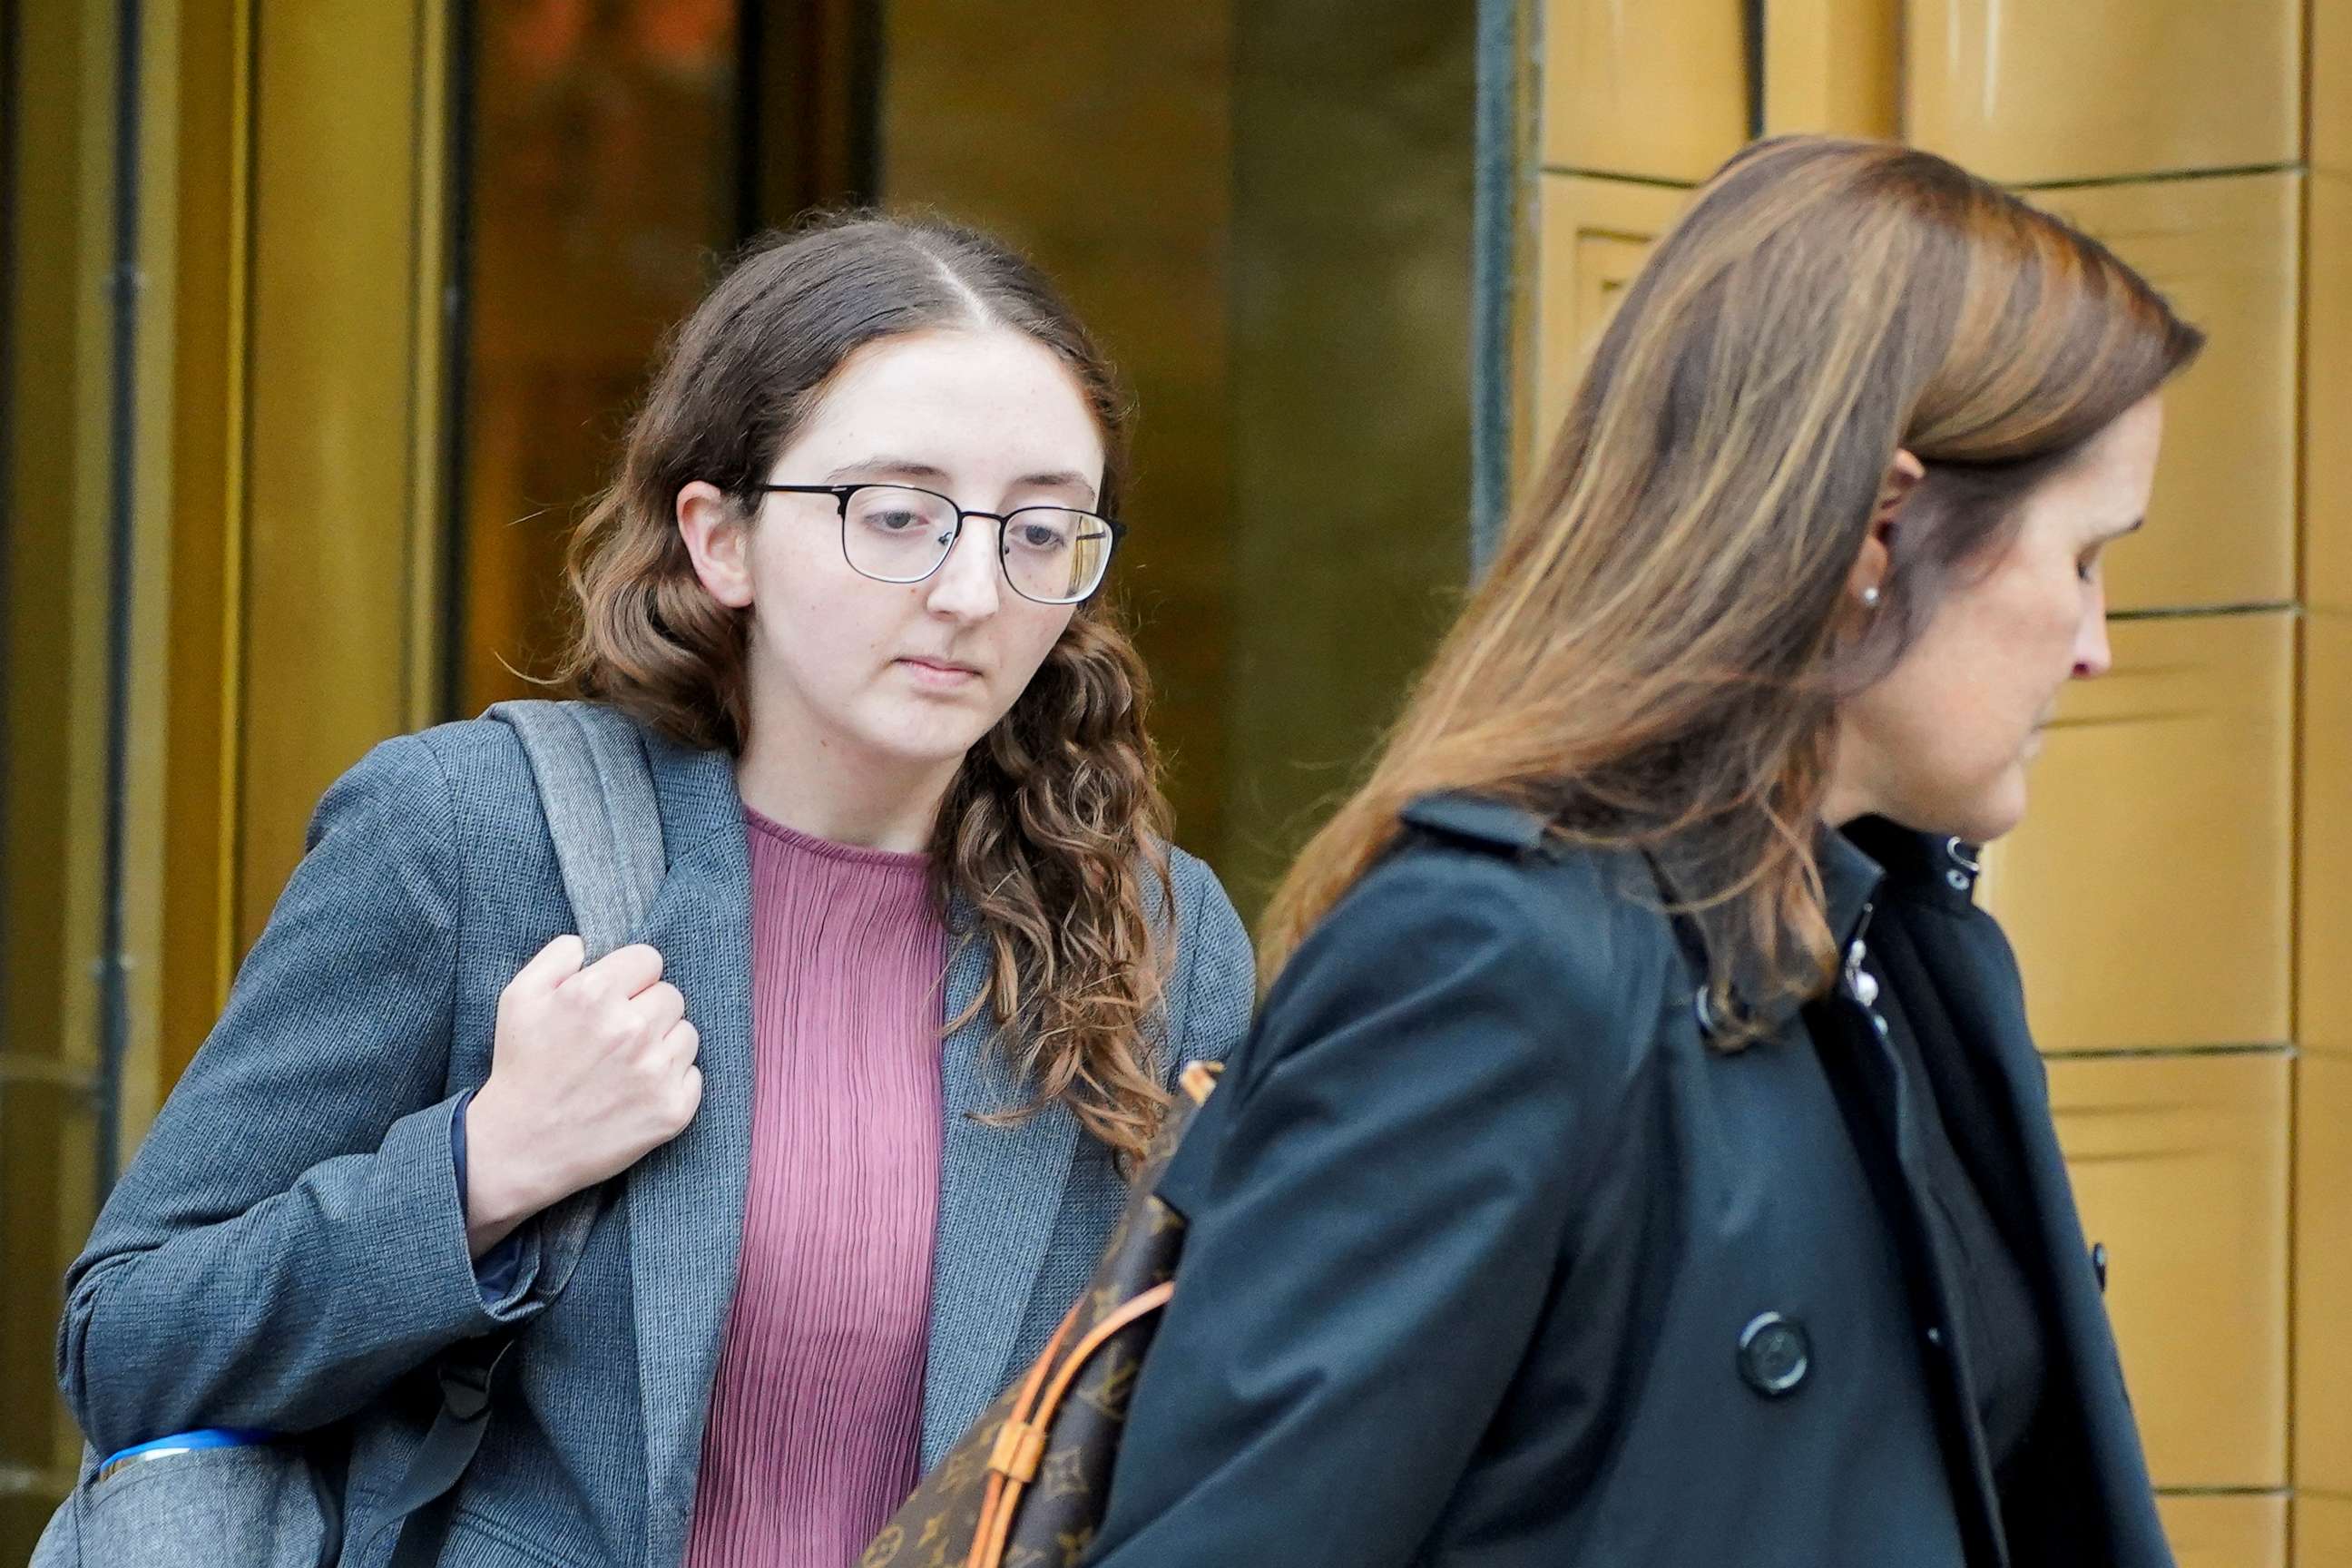 PHOTO: Former crypto hedge fund Alameda Research CEO Caroline Ellison departs the trial of former FTX Chief Executive Sam Bankman-Fried who is facing fraud charges over the collapse of the bankrupt cryptocurrency exchange, in New York City, Oct. 10, 2023.